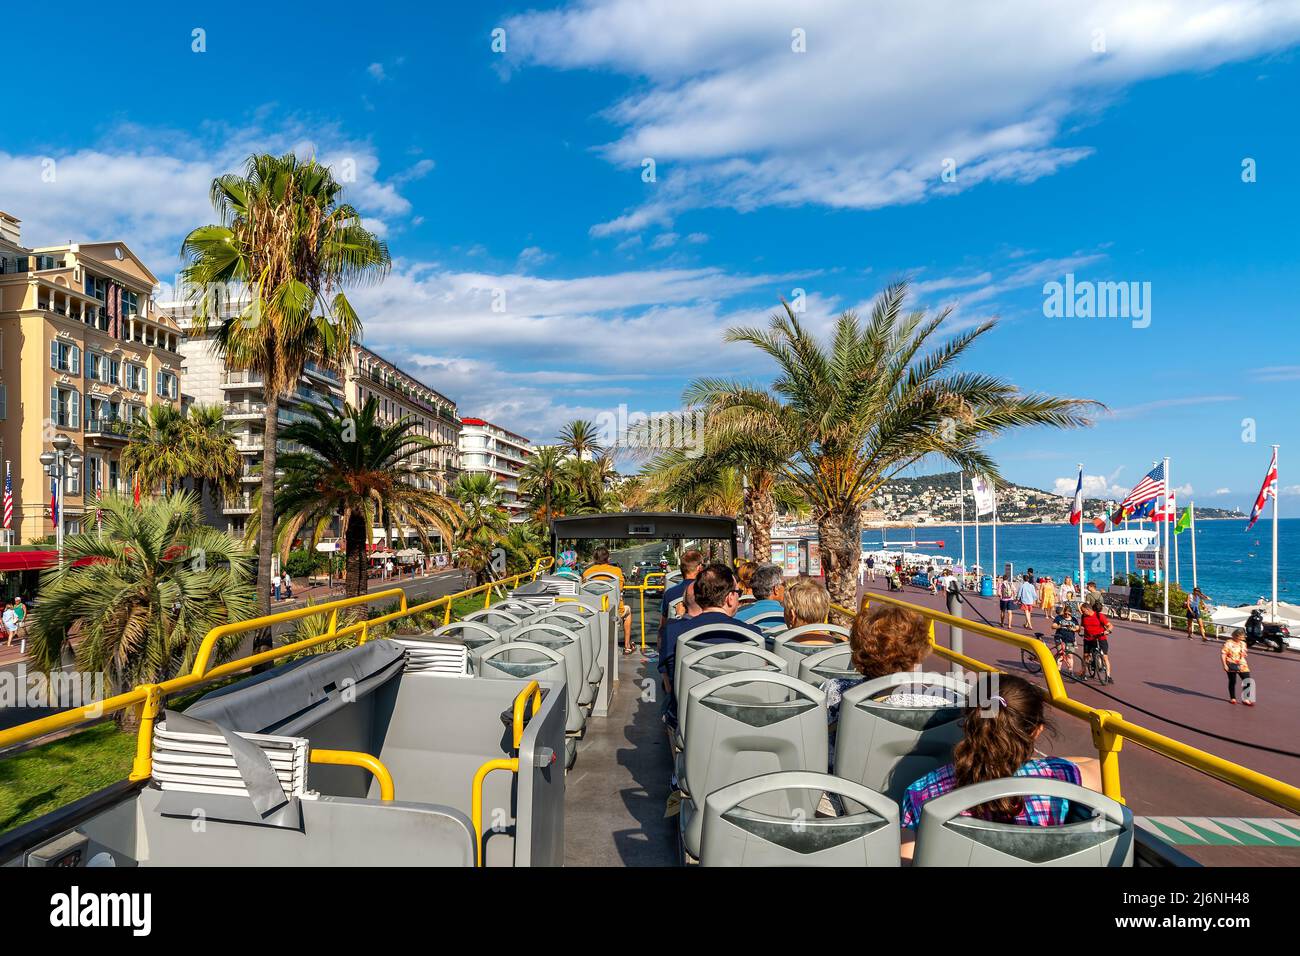 Tourists on sightseeing tour bus passing by buildings and Promenade des Anglais along Mediterranean sea coastline in Nice, France. Stock Photo